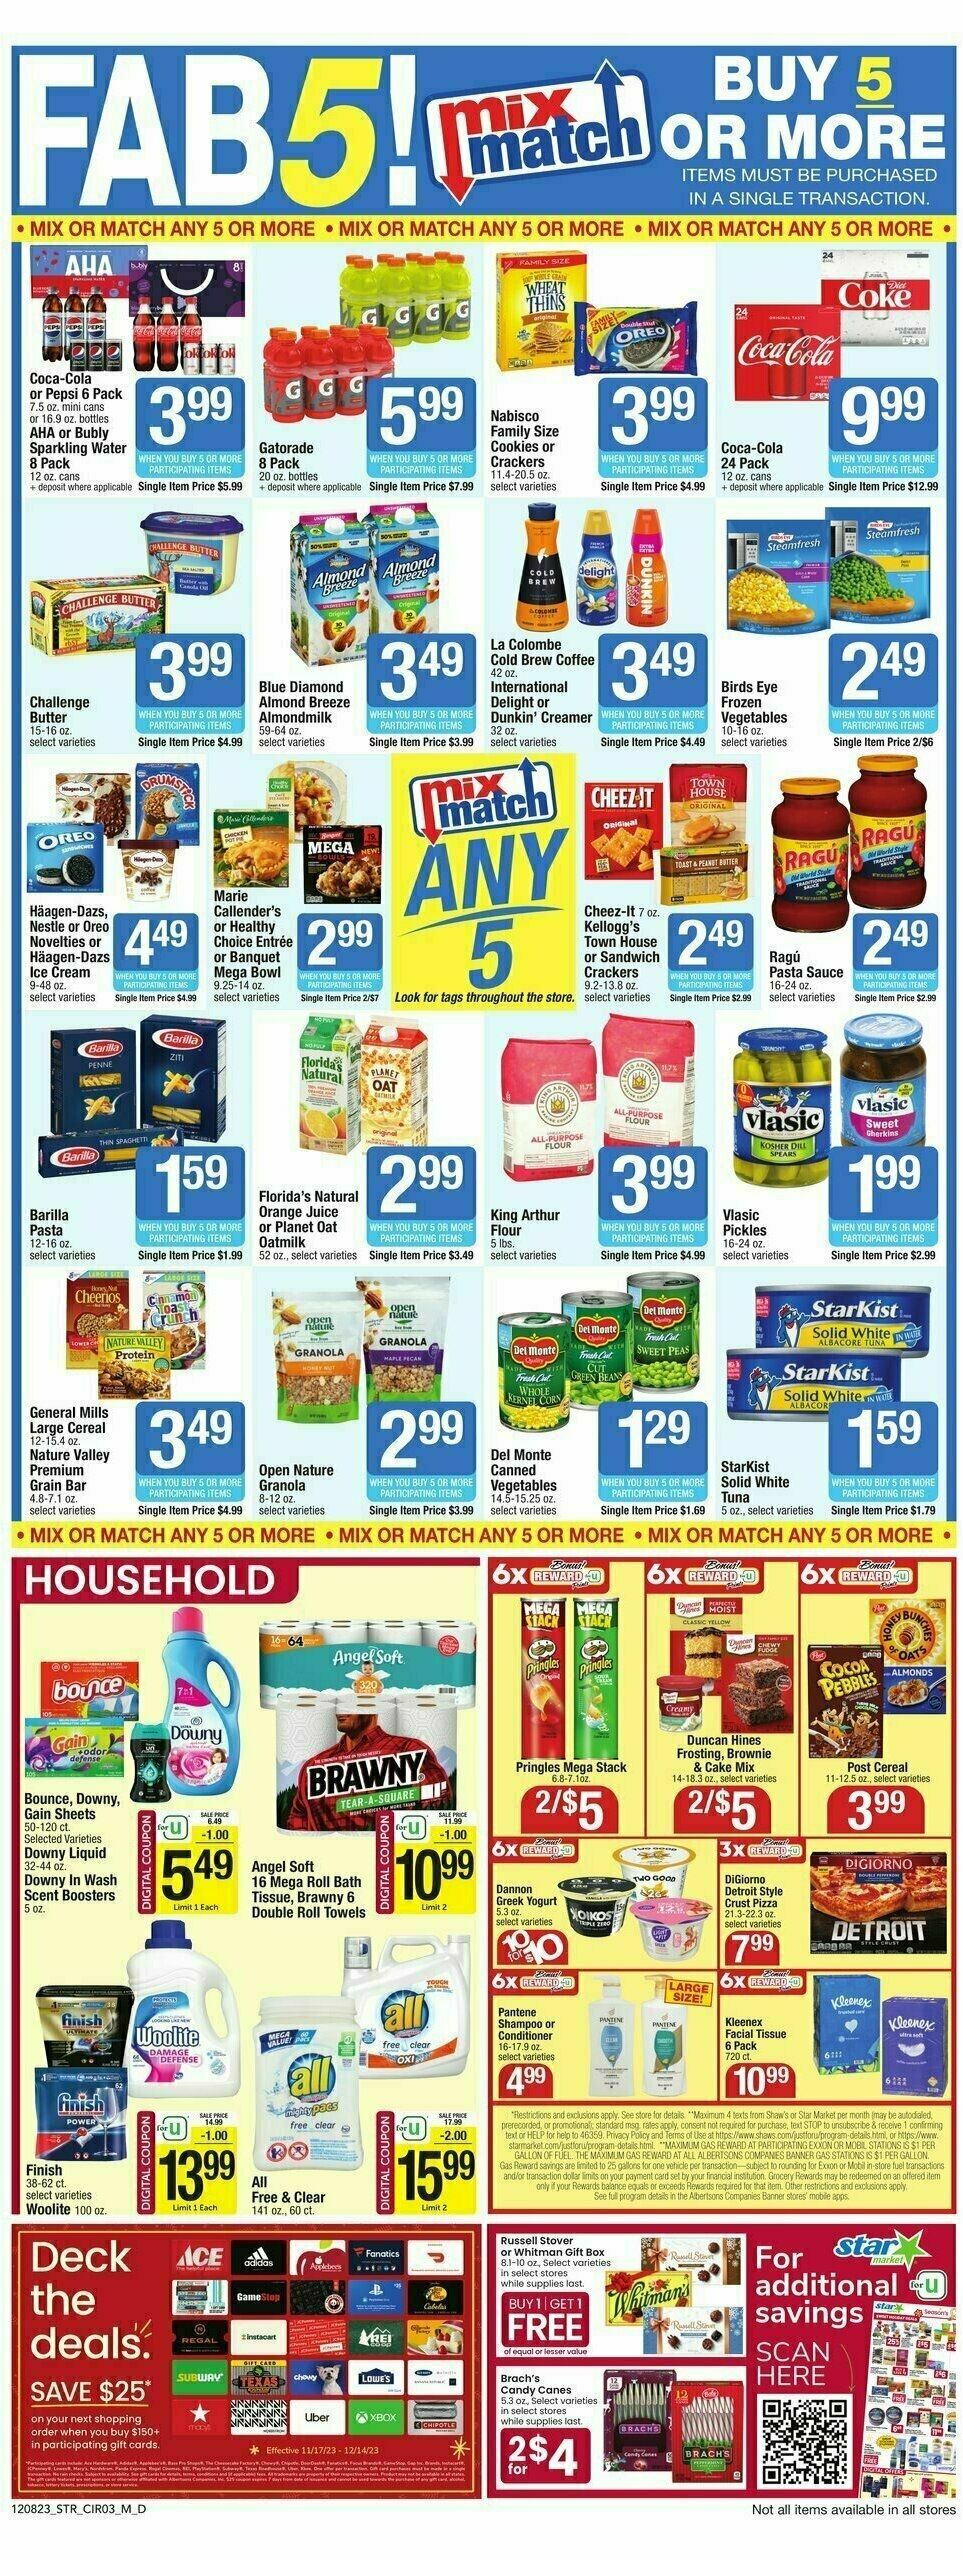 Star Market Weekly Ad from December 8